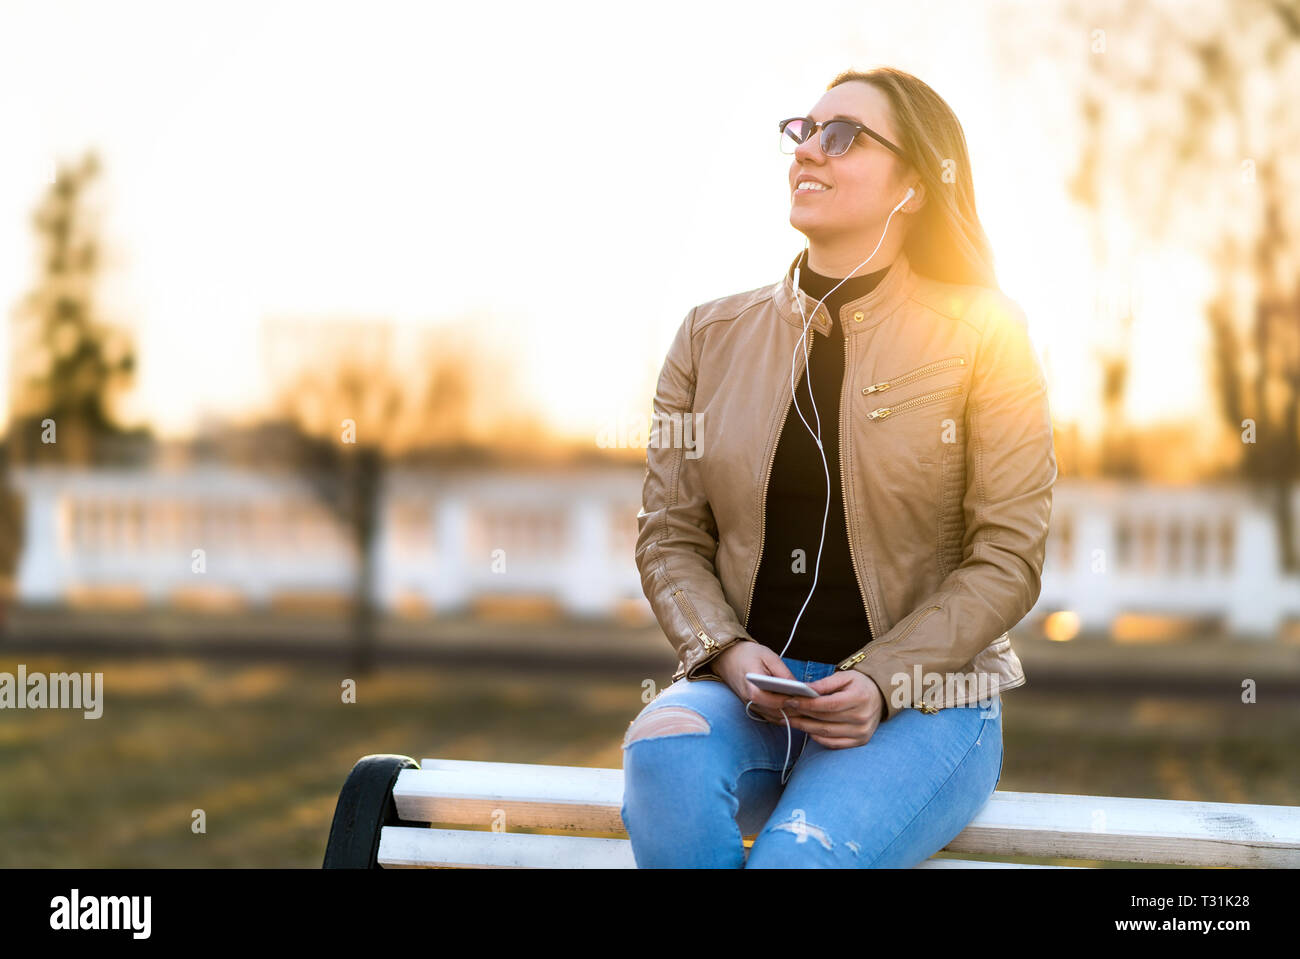 Woman listening to music outdoors. Happy smiling lady sitting on park bench holding mobile phone in sunset. Listening to audiobook outside. Stock Photo